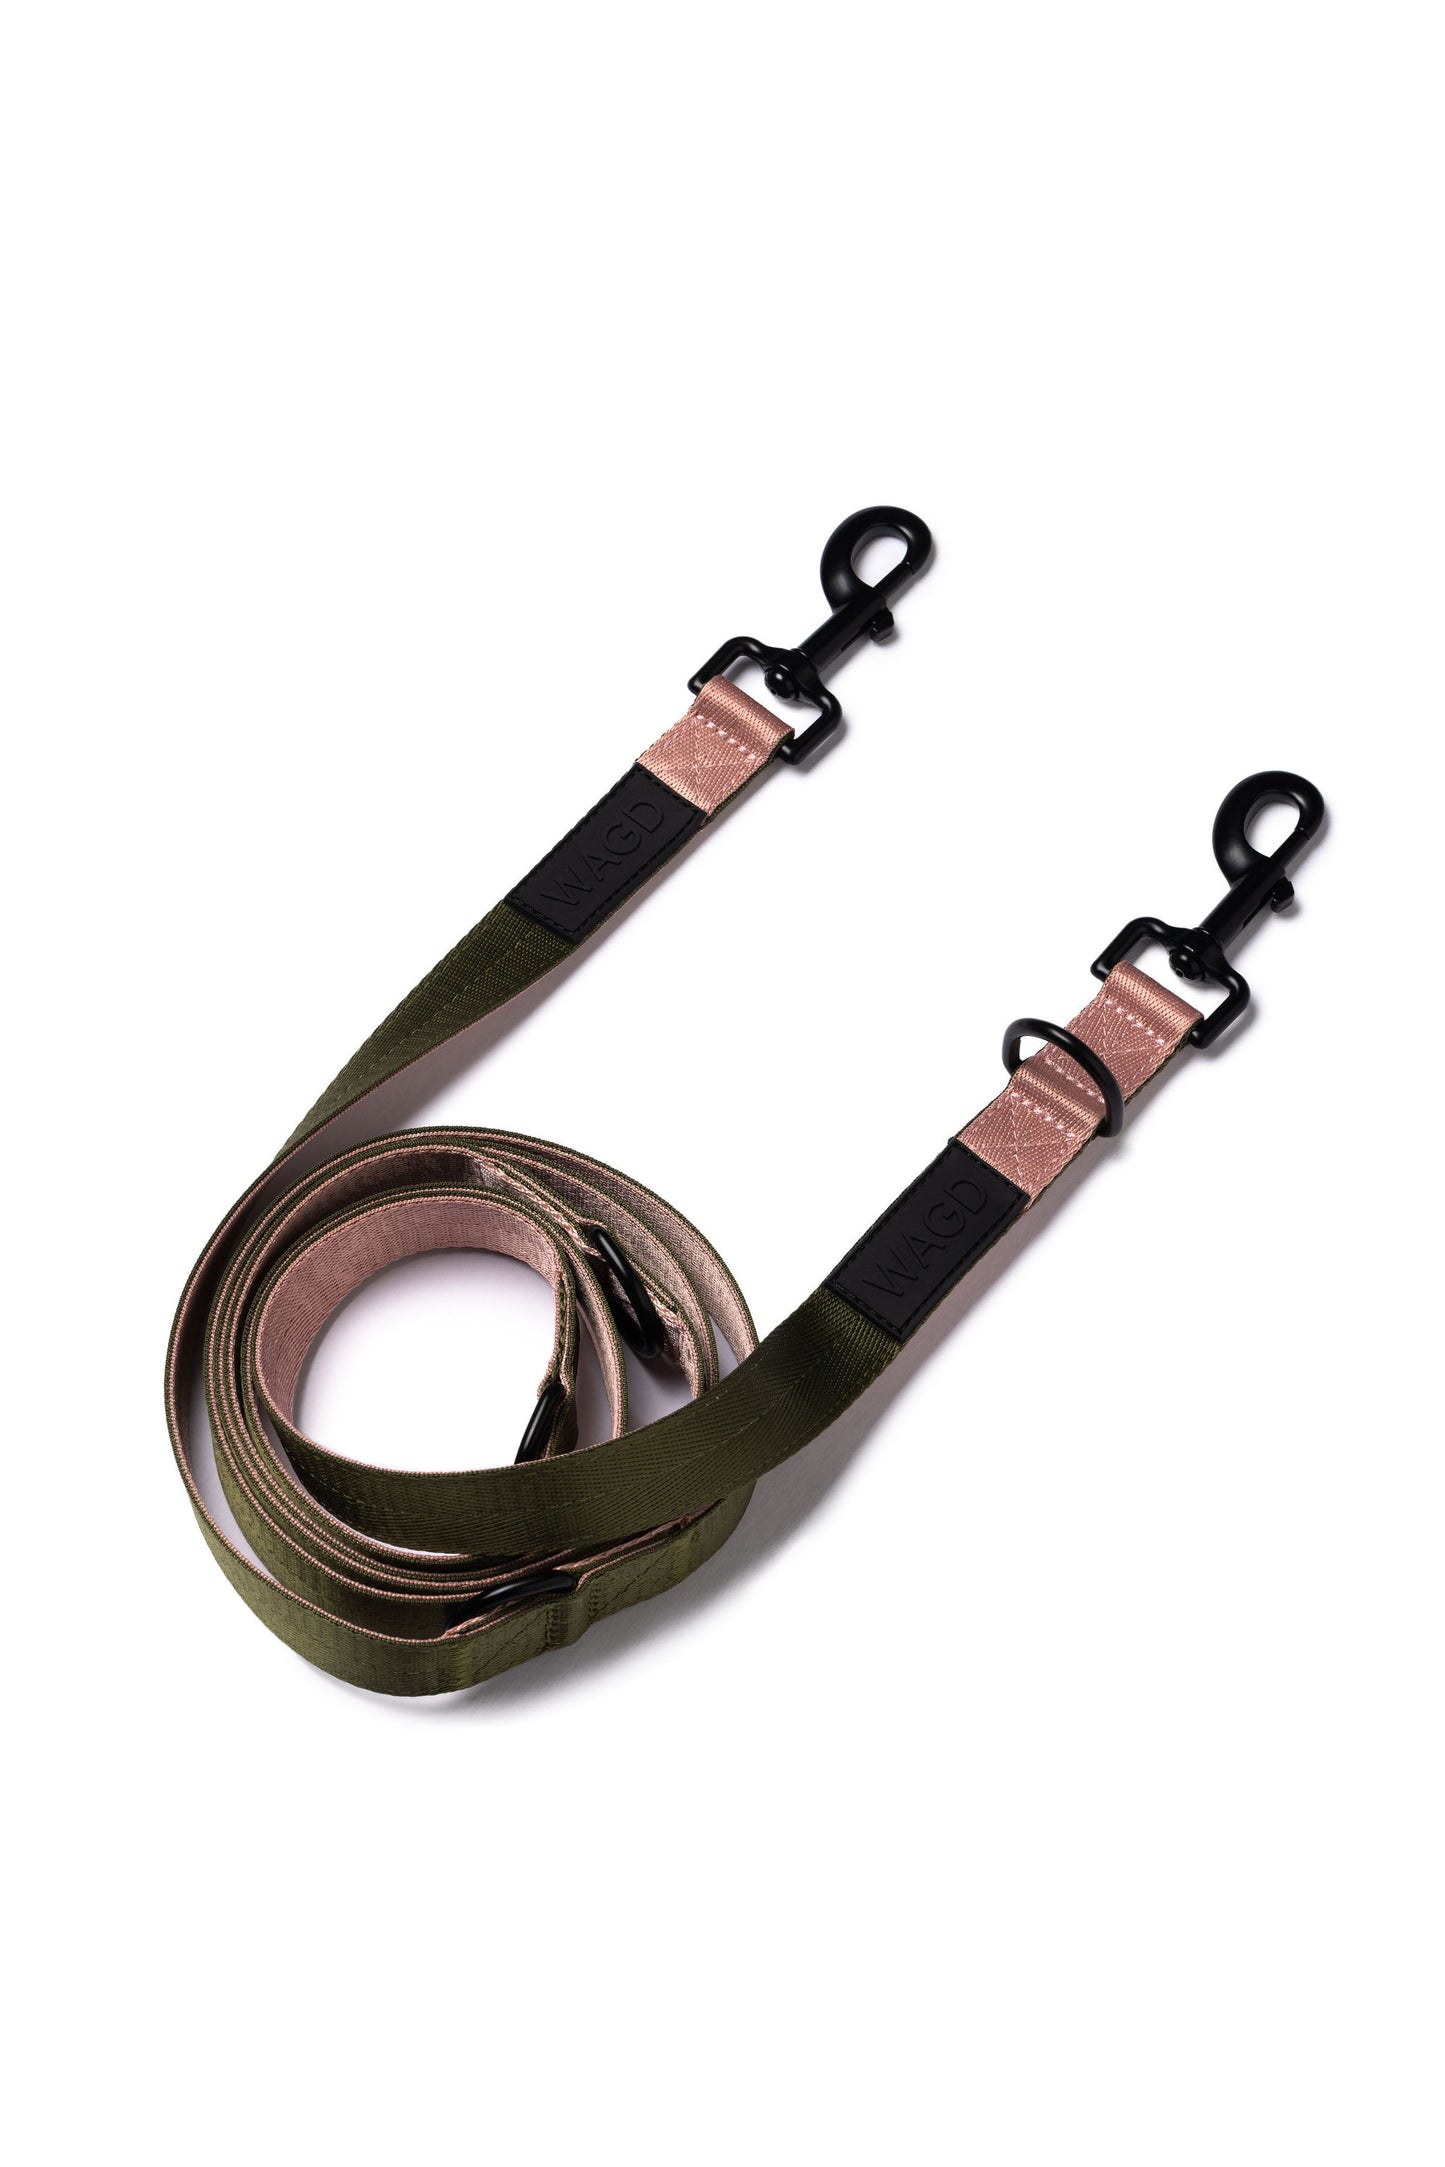 Multi length lead in Olive and Rose with 2 black metal clips at either end and with WAGD rubber logo. 